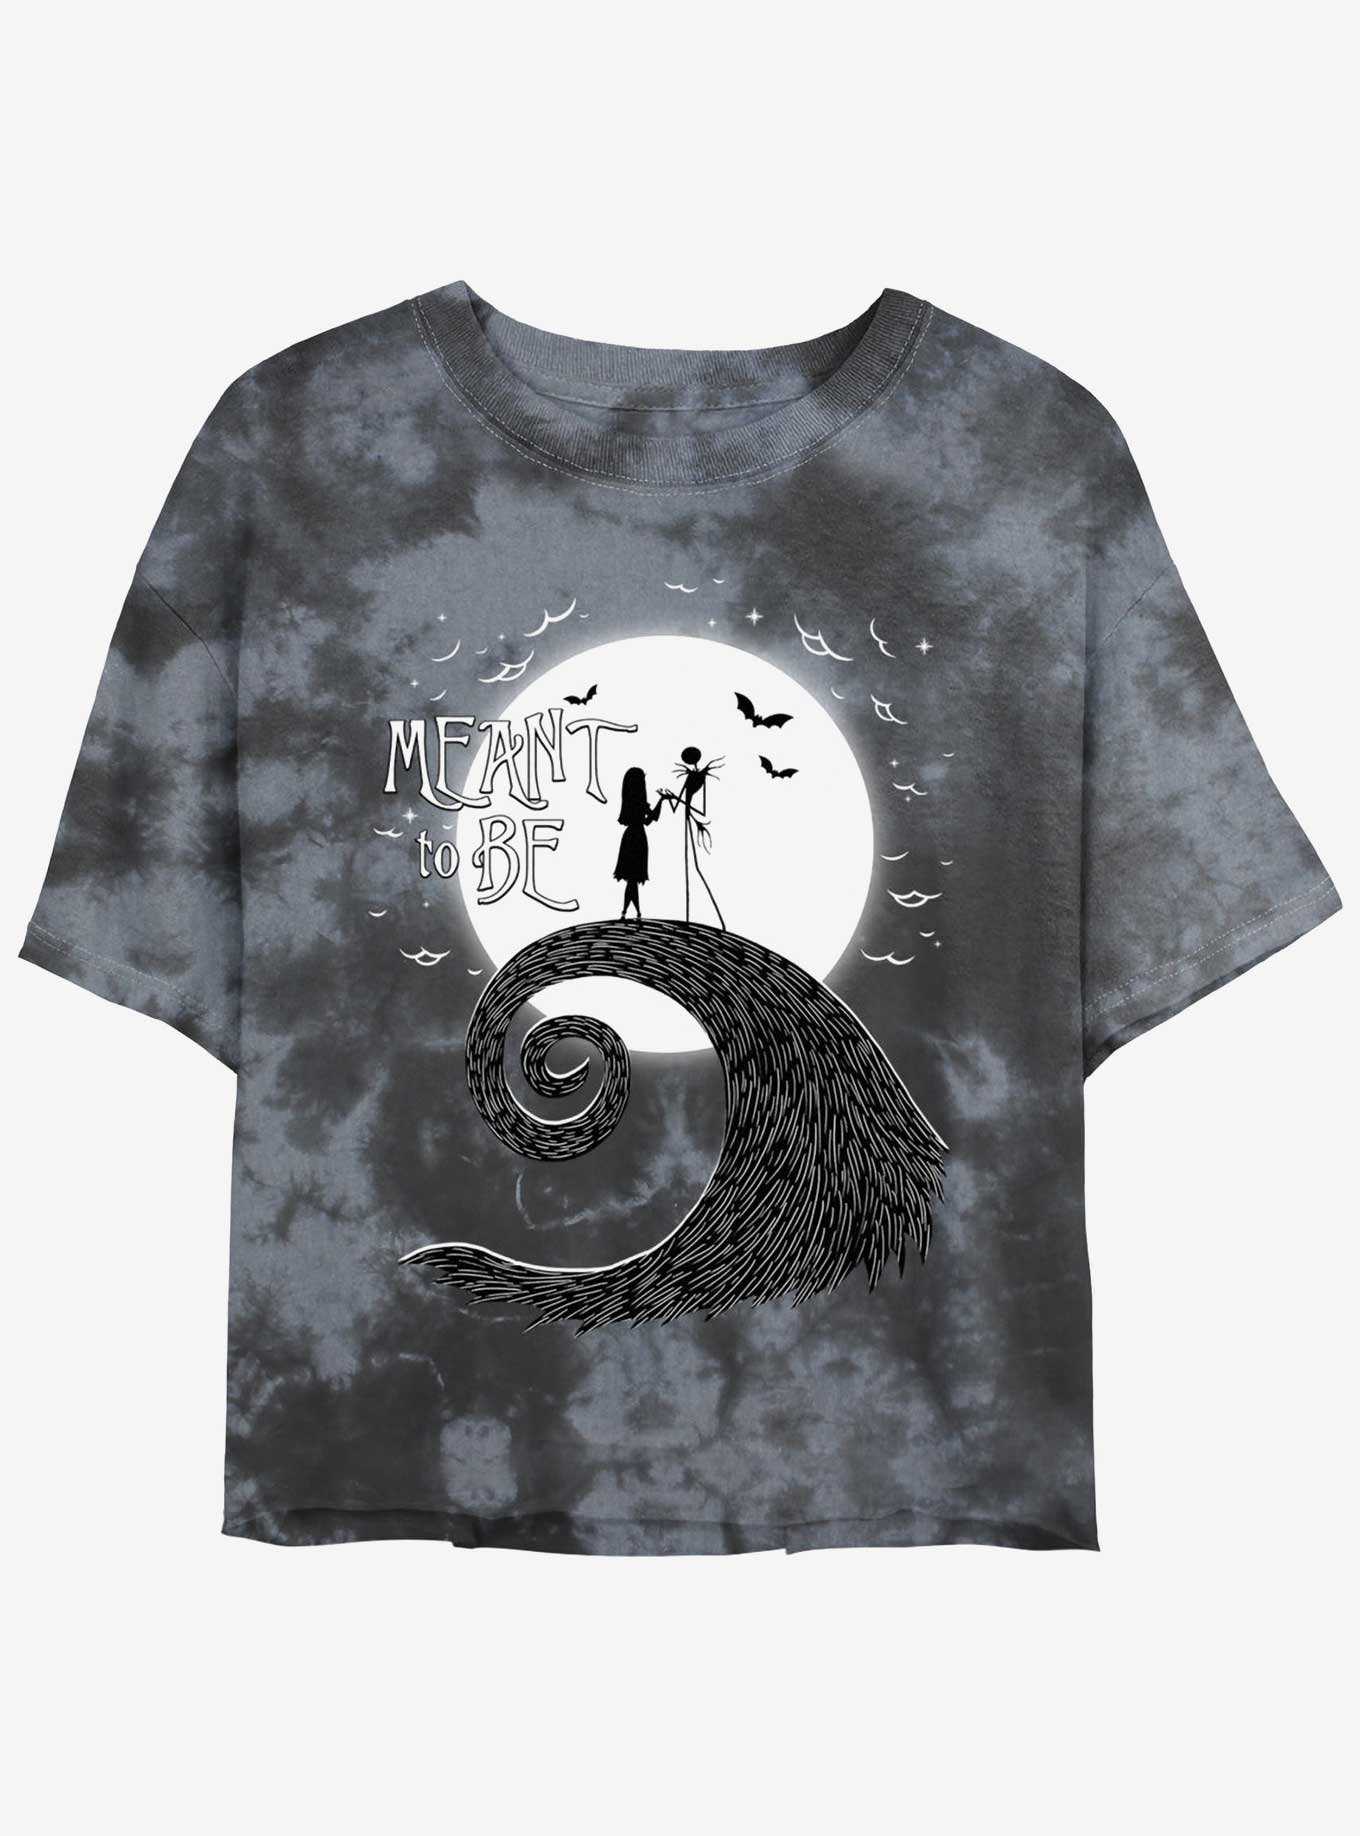 Disney The Nightmare Before Christmas Jack and Sally Meant To Be Tie-Dye Girls Crop T-Shirt, , hi-res